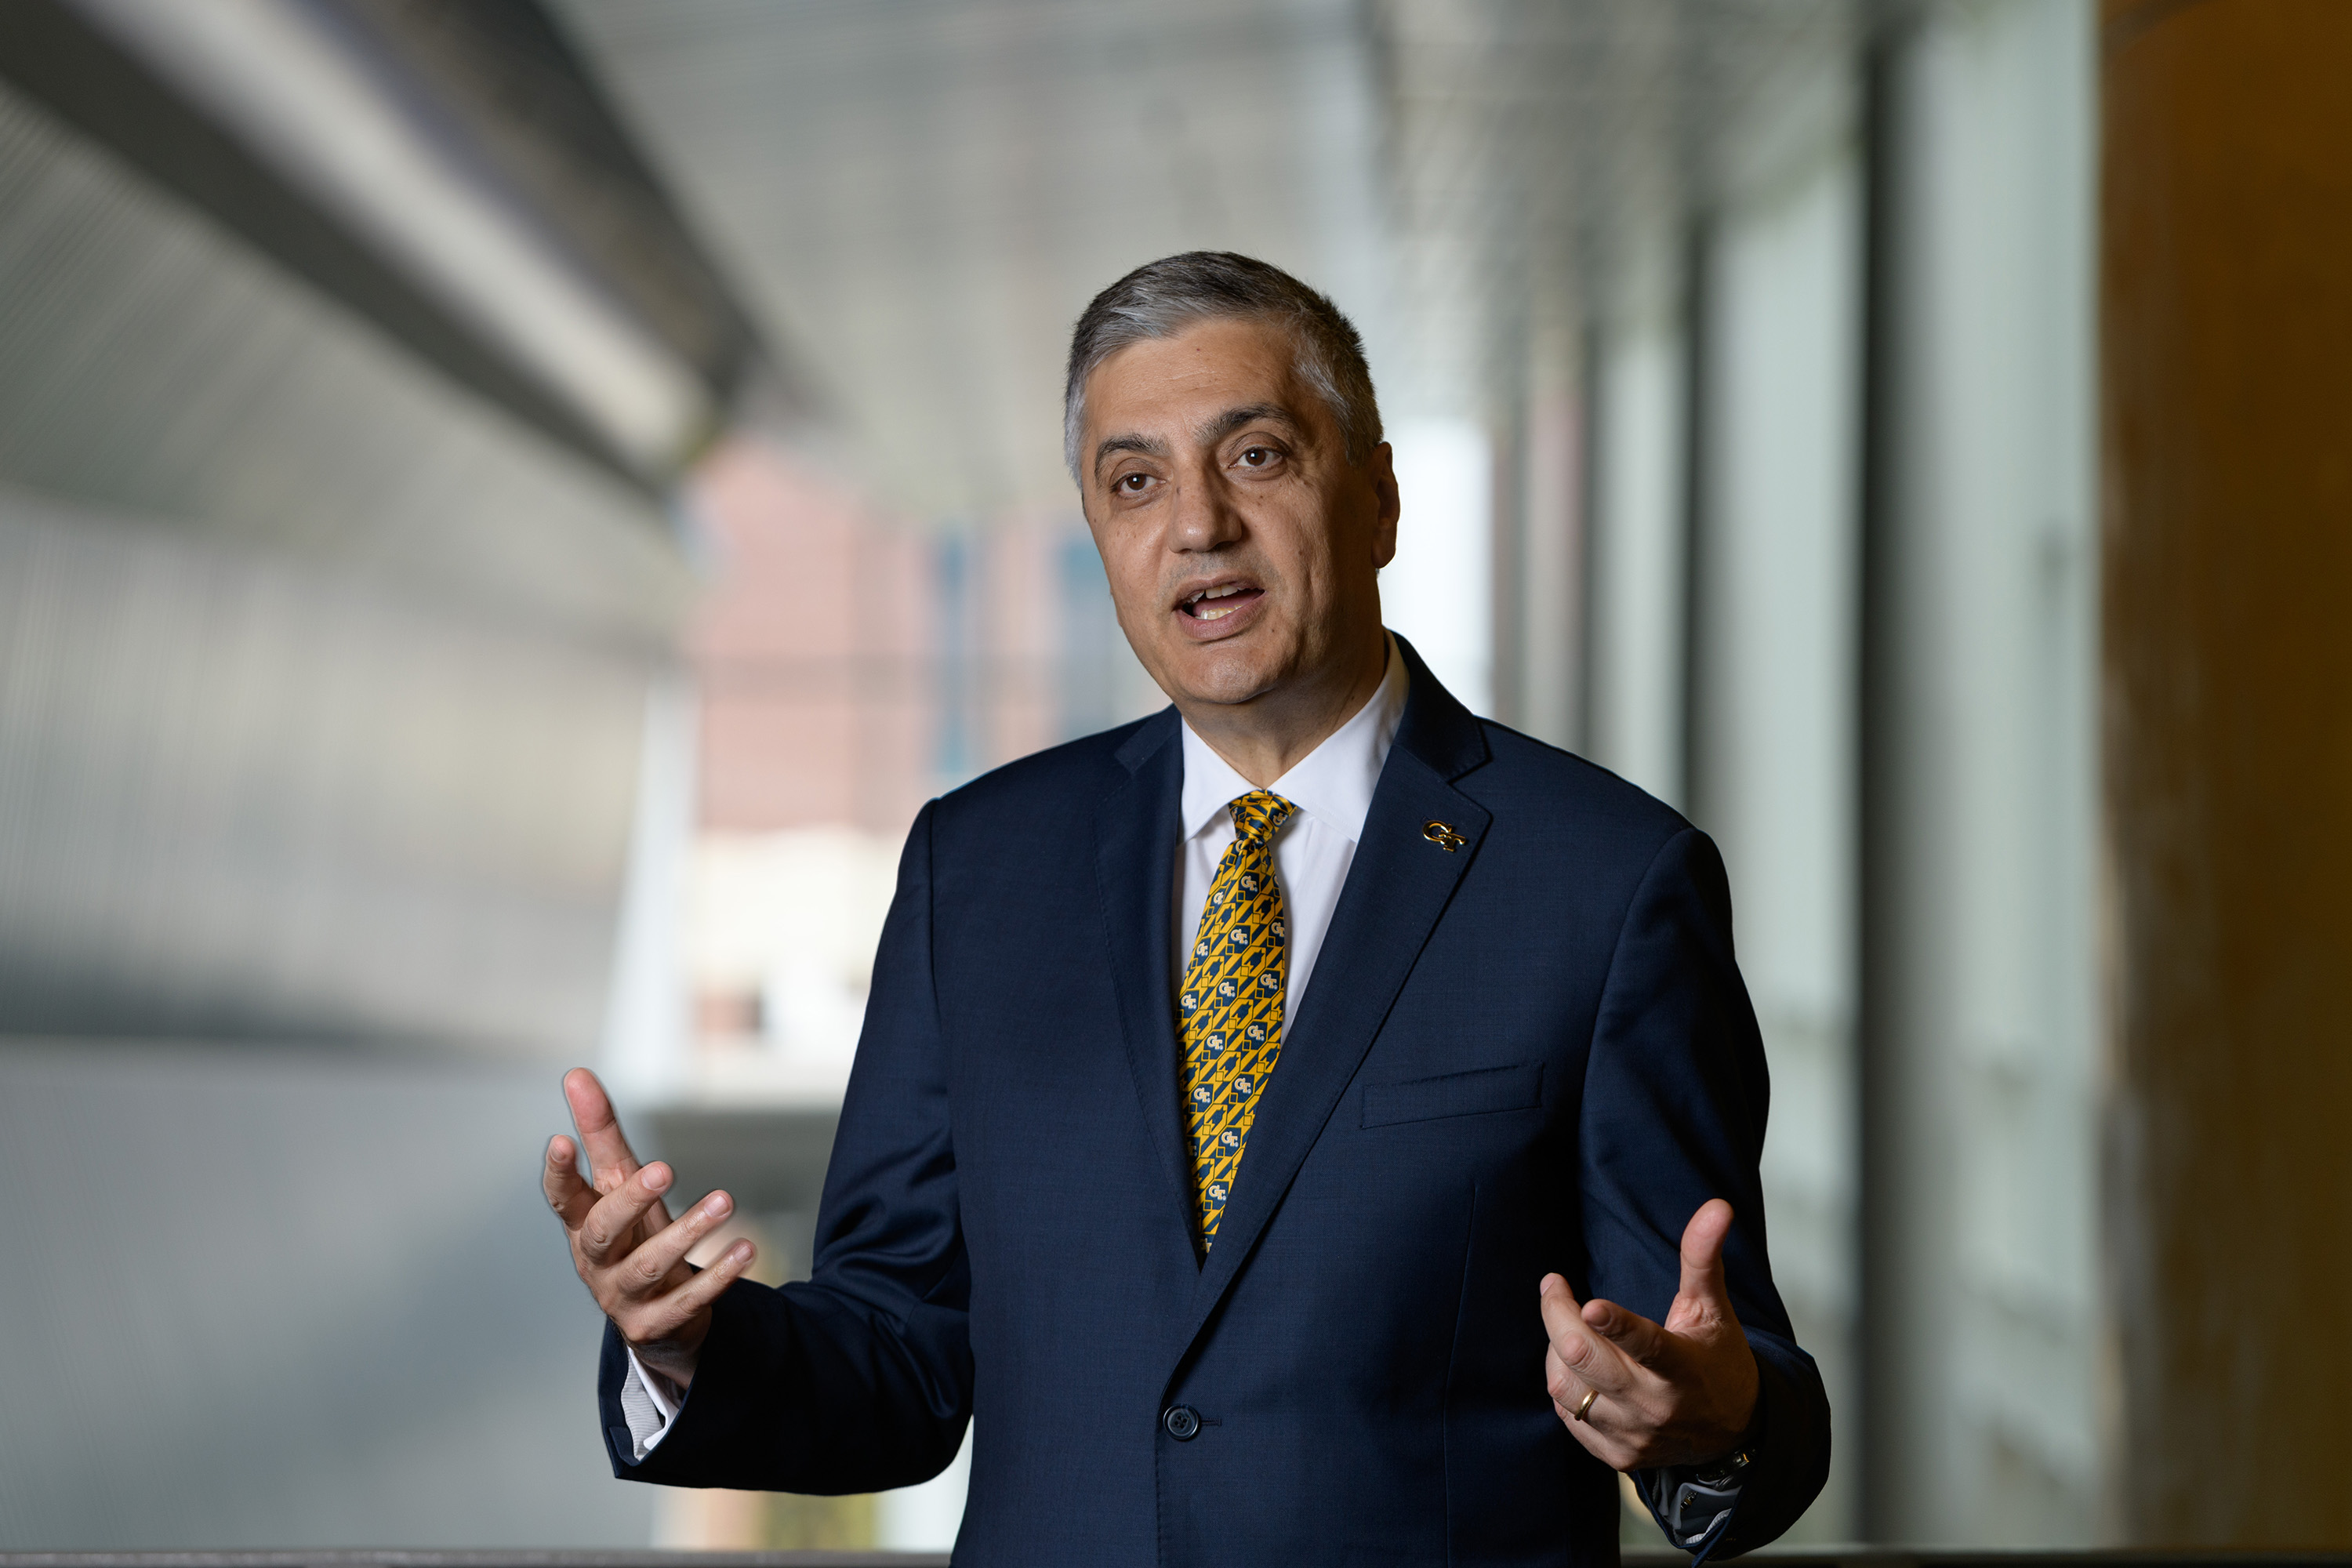 Chaouki Abdallah is Georgia Tech's executive vice president for research. He's shown in the Marcus Nanotechnology Buildling. (Credit: Rob Felt, Georgia Tech)